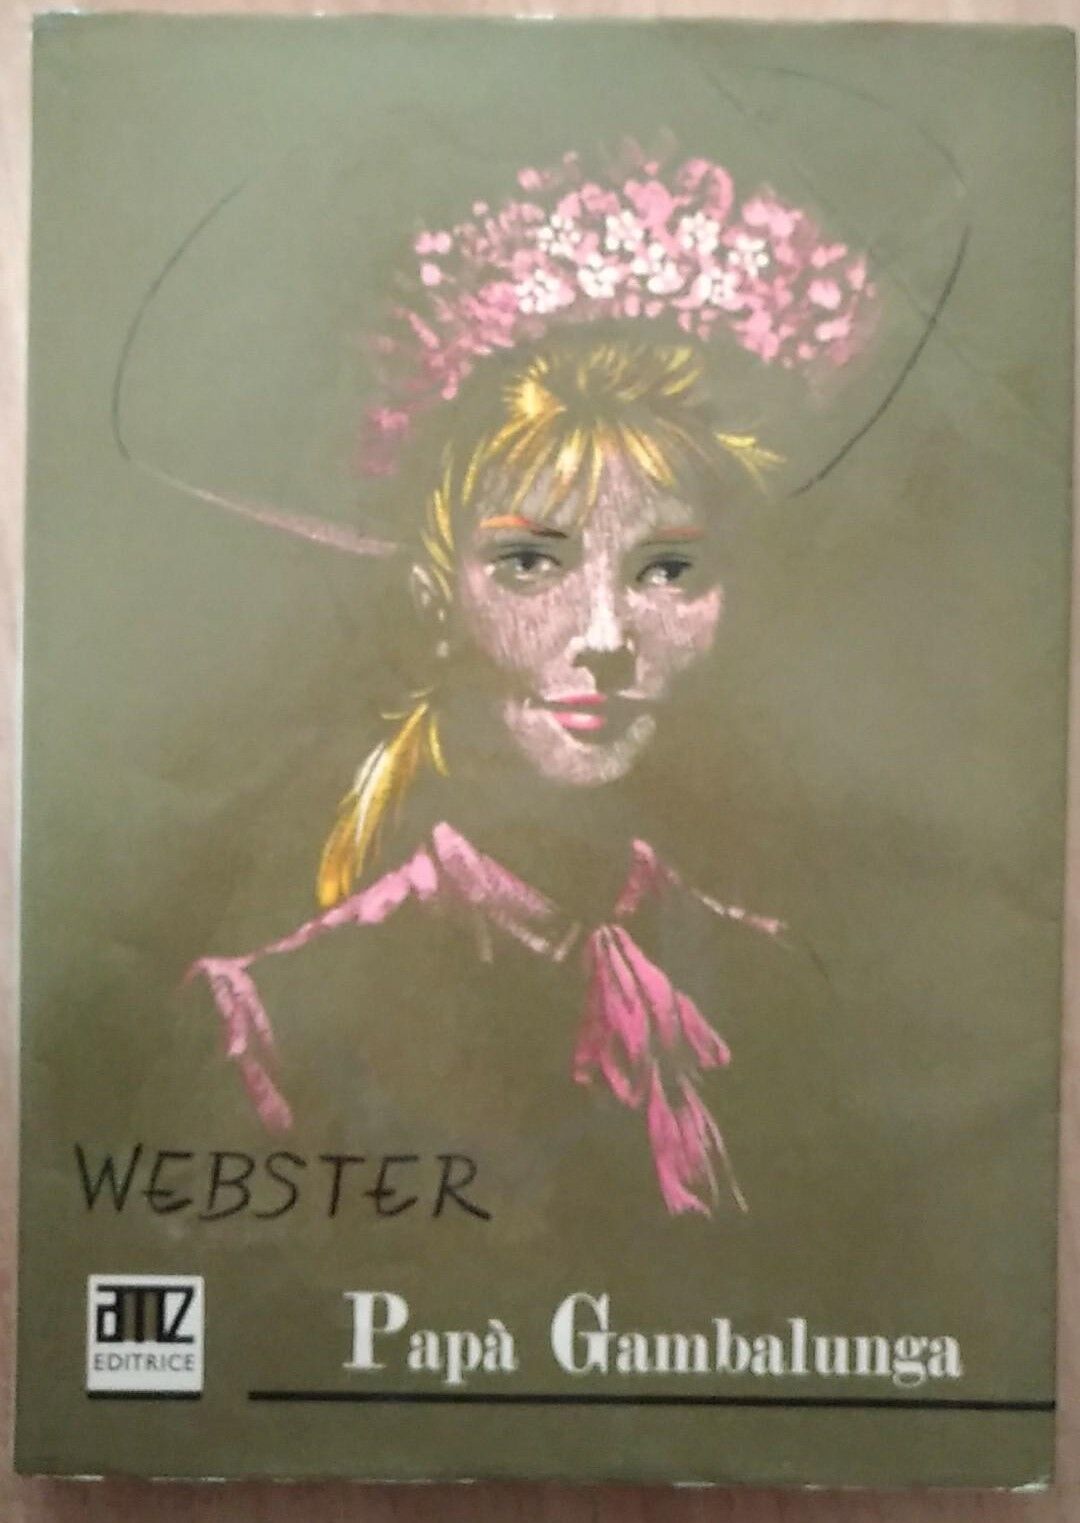 Pap? Gambalunga - A. Jean Webster, AMZ editrice Milano, 1966 - S